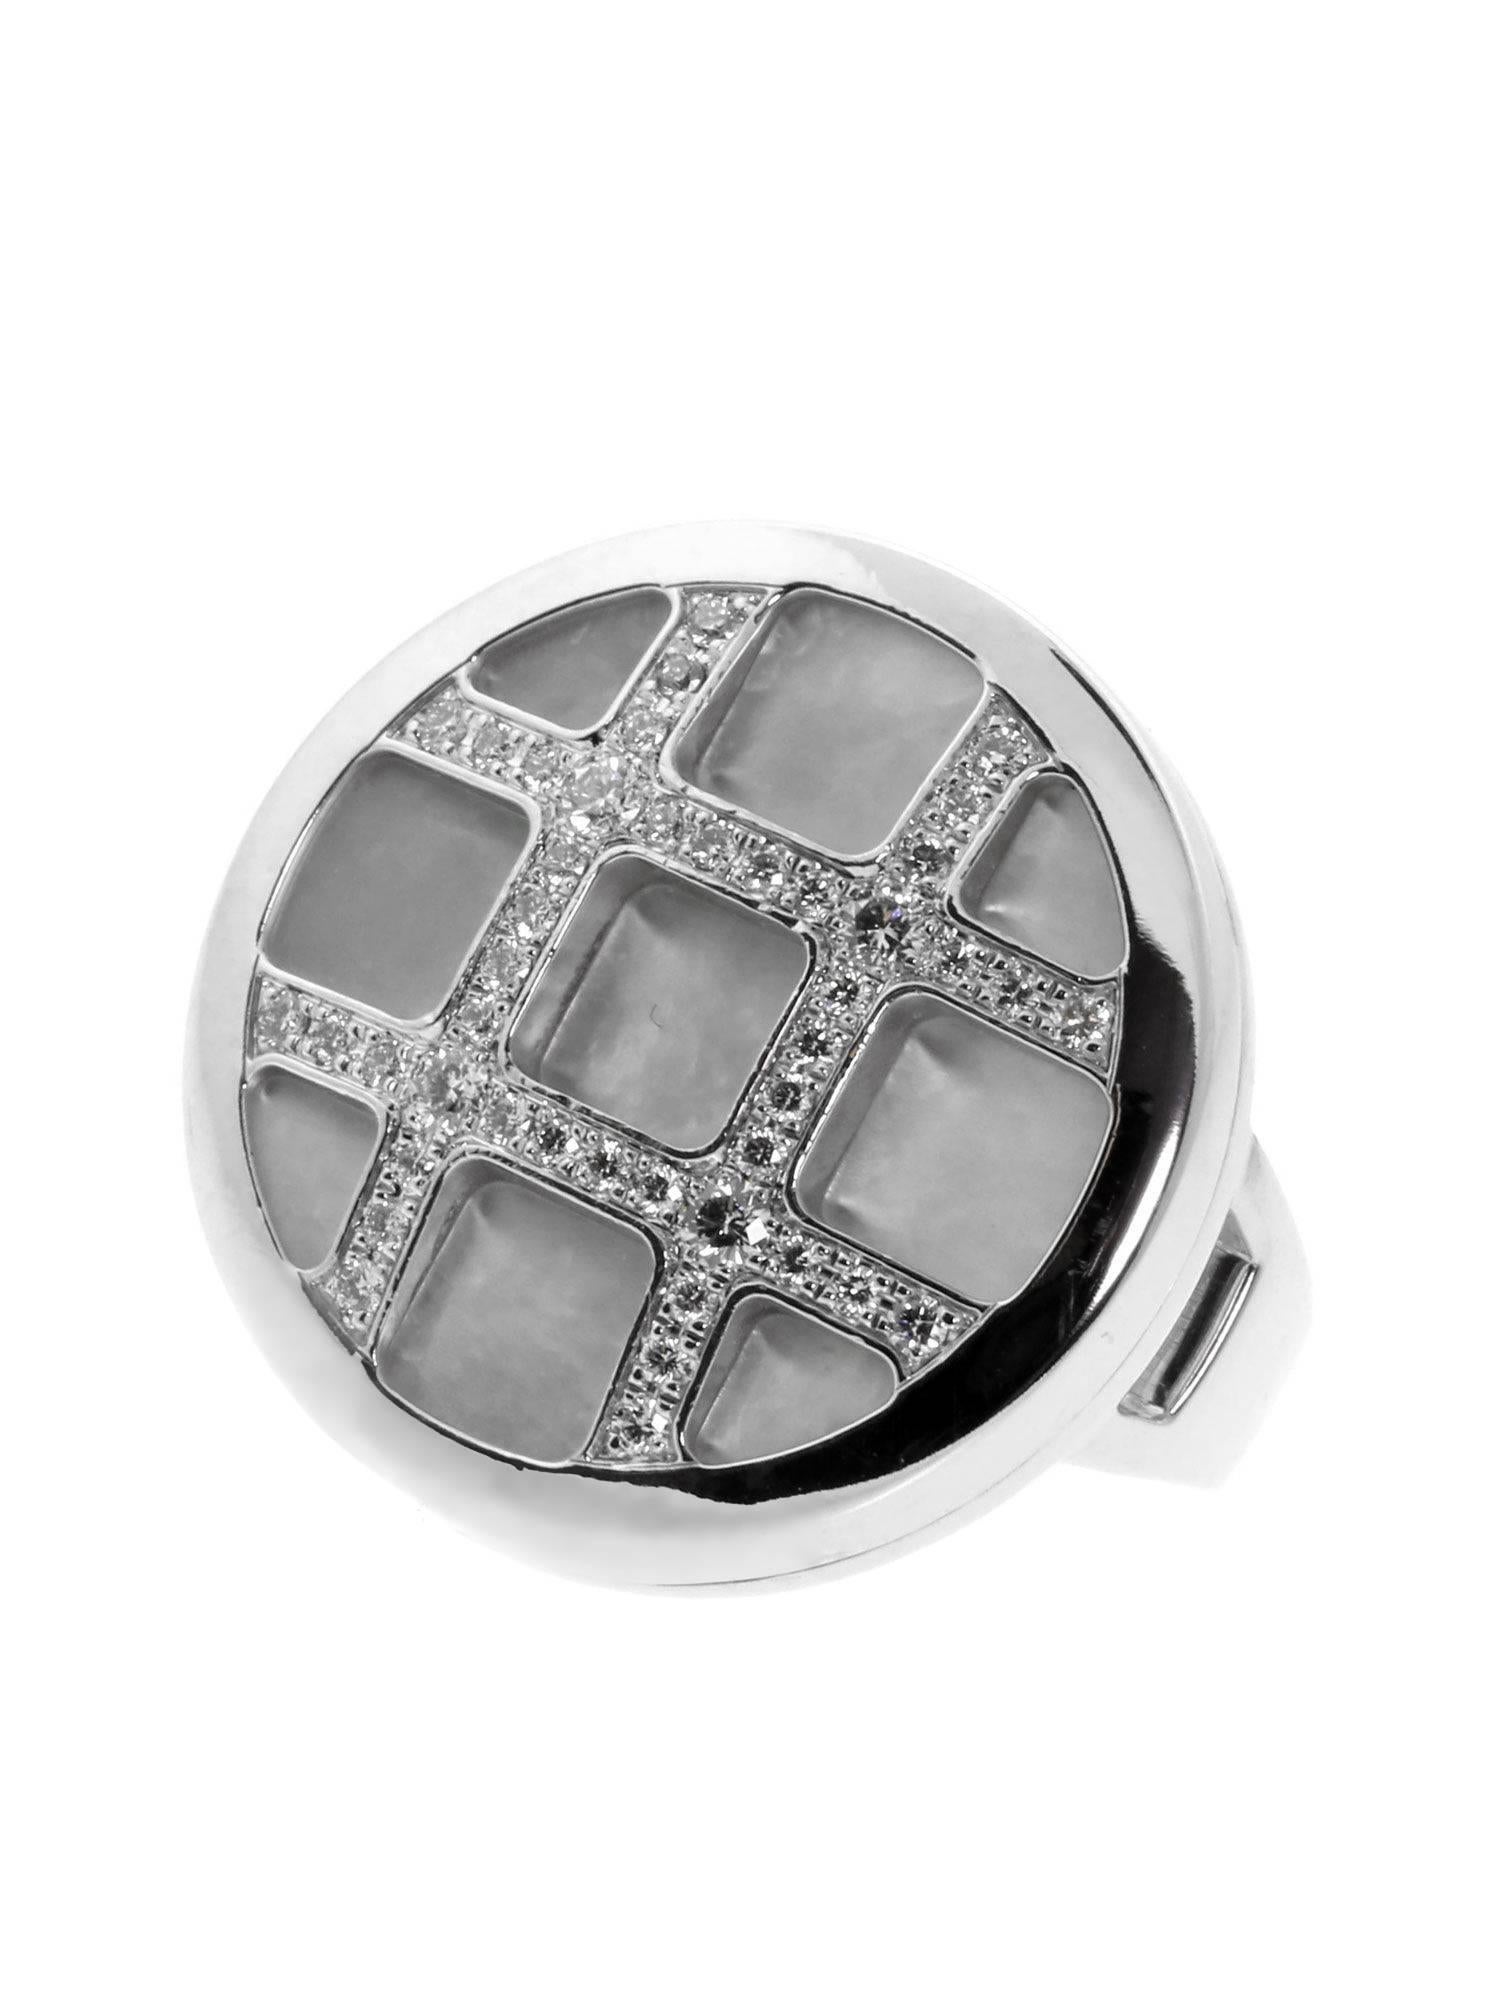 A fabulous authentic Cartier cocktail ring featuring 44 of the finest Cartier round brilliant cut diamonds dazzling over a mother of pearl backdrop set in 18k white gold.

Size: US 5 3/4 / EU 52
Dimensions: .94″ Inches wide

Inventory ID: 0000137